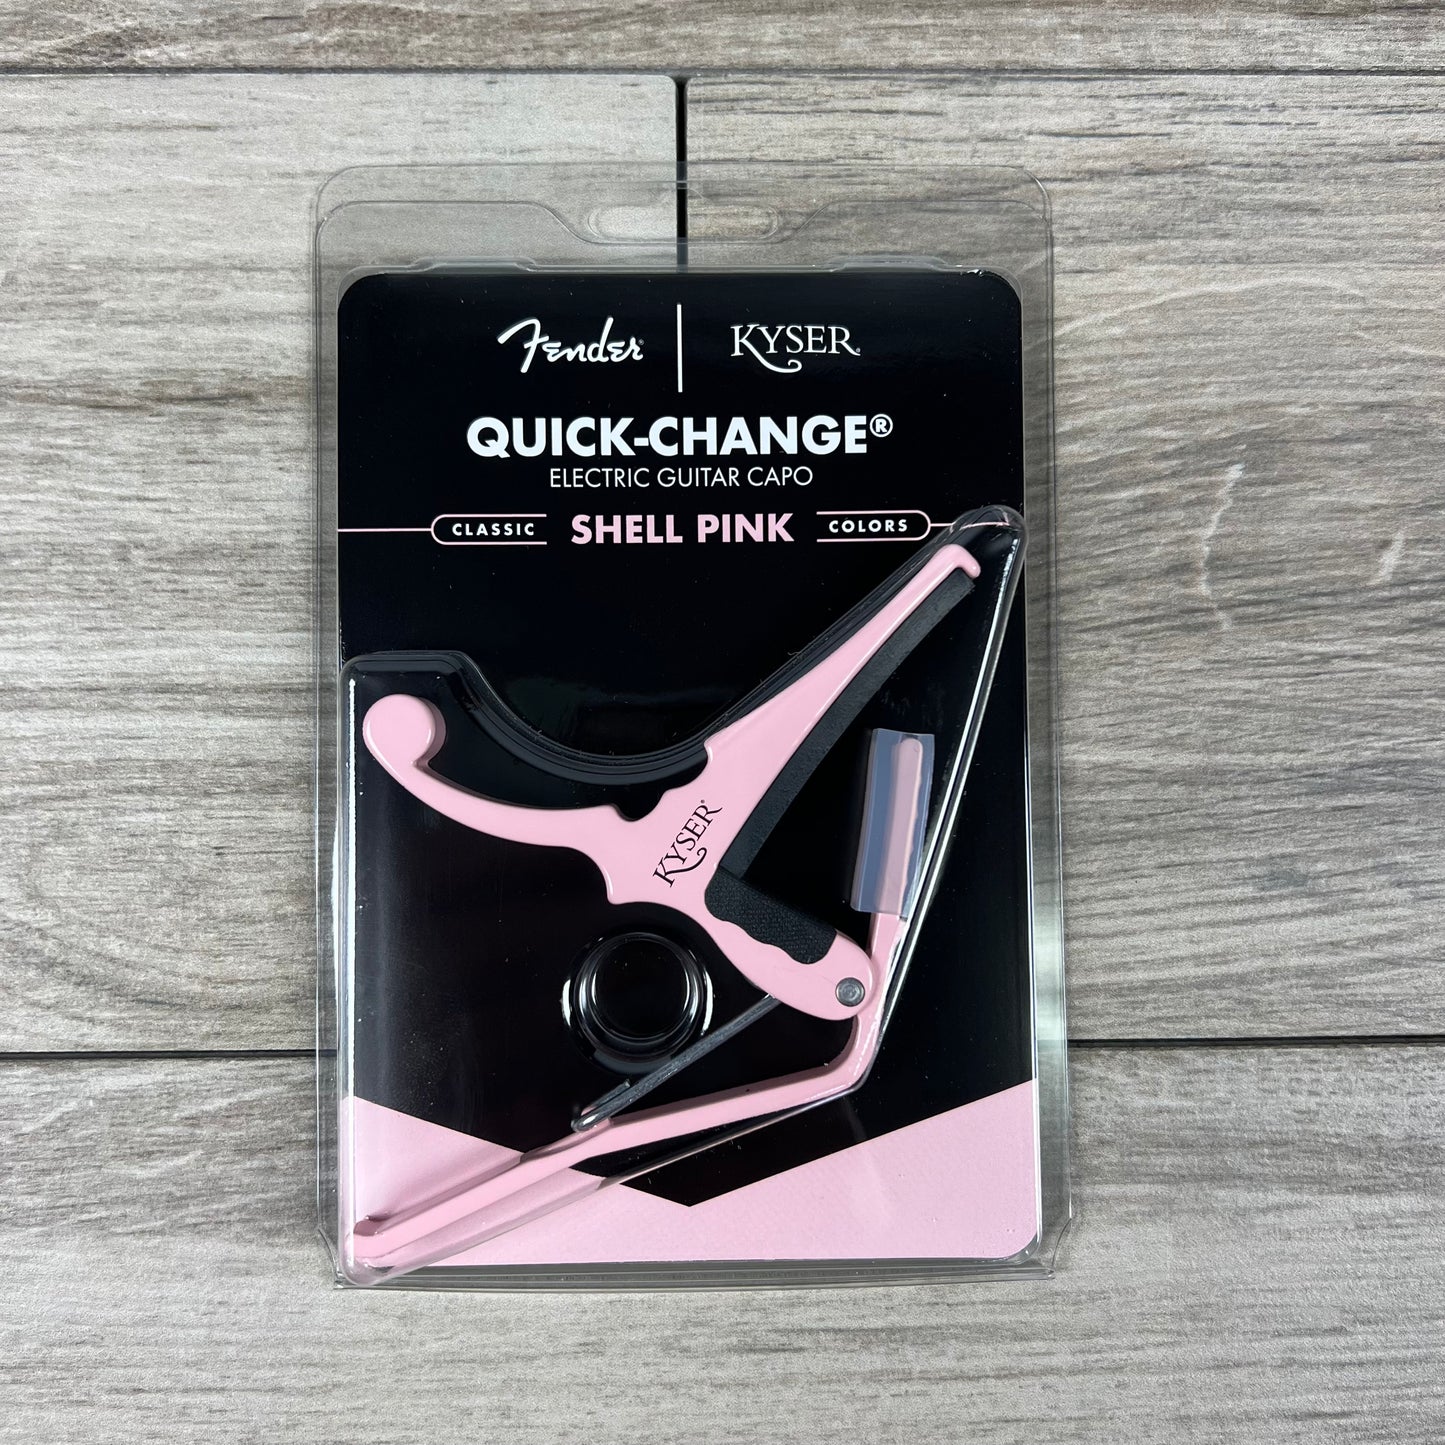 Kyser x Fender Quick-Change Electric Guitar Capo, Shell Pink